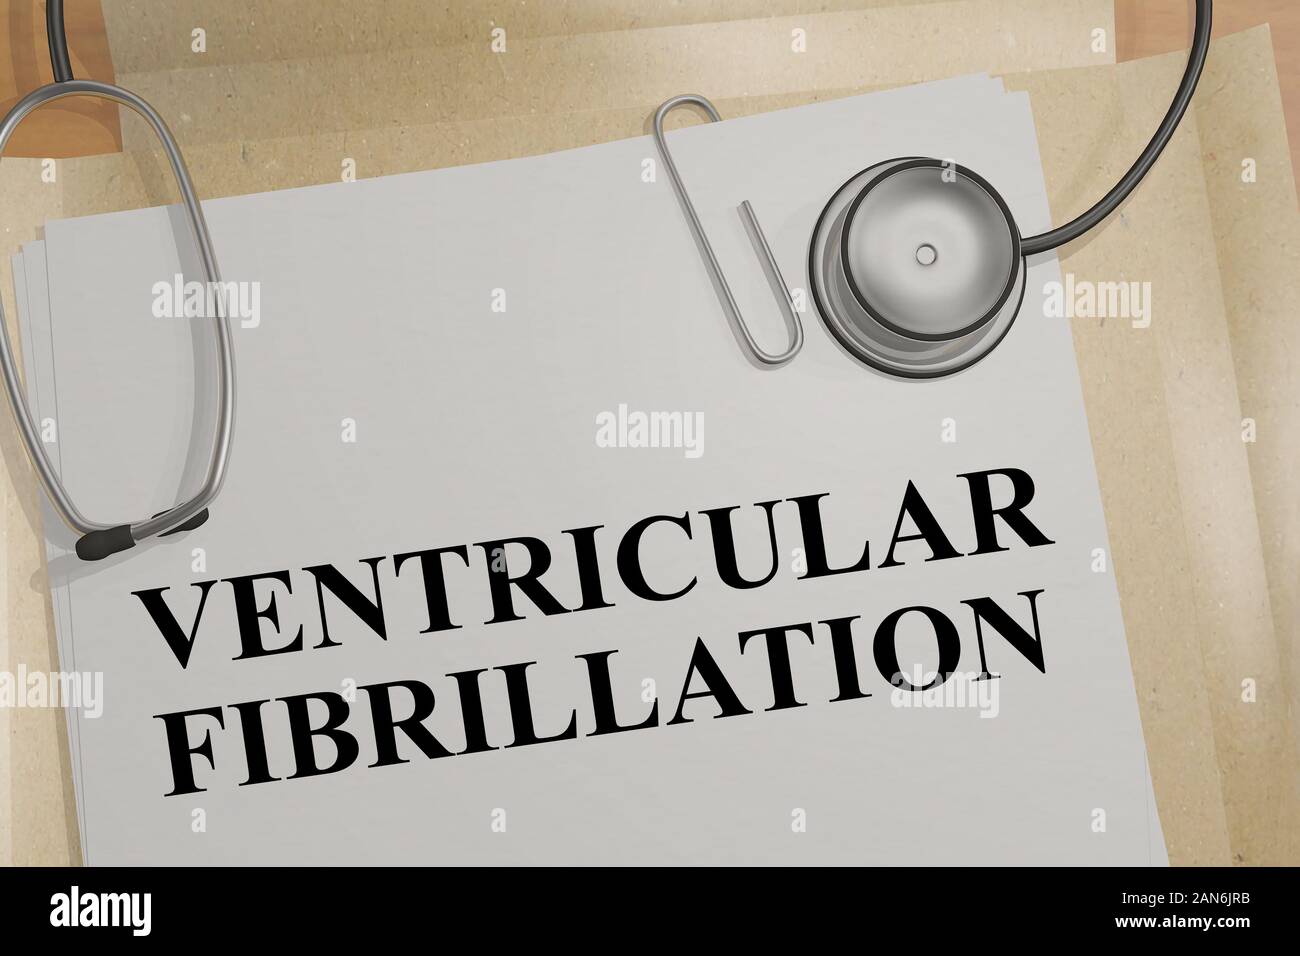 3D illustration of VENTRICULAR FIBRILLATION title on a medical document Stock Photo